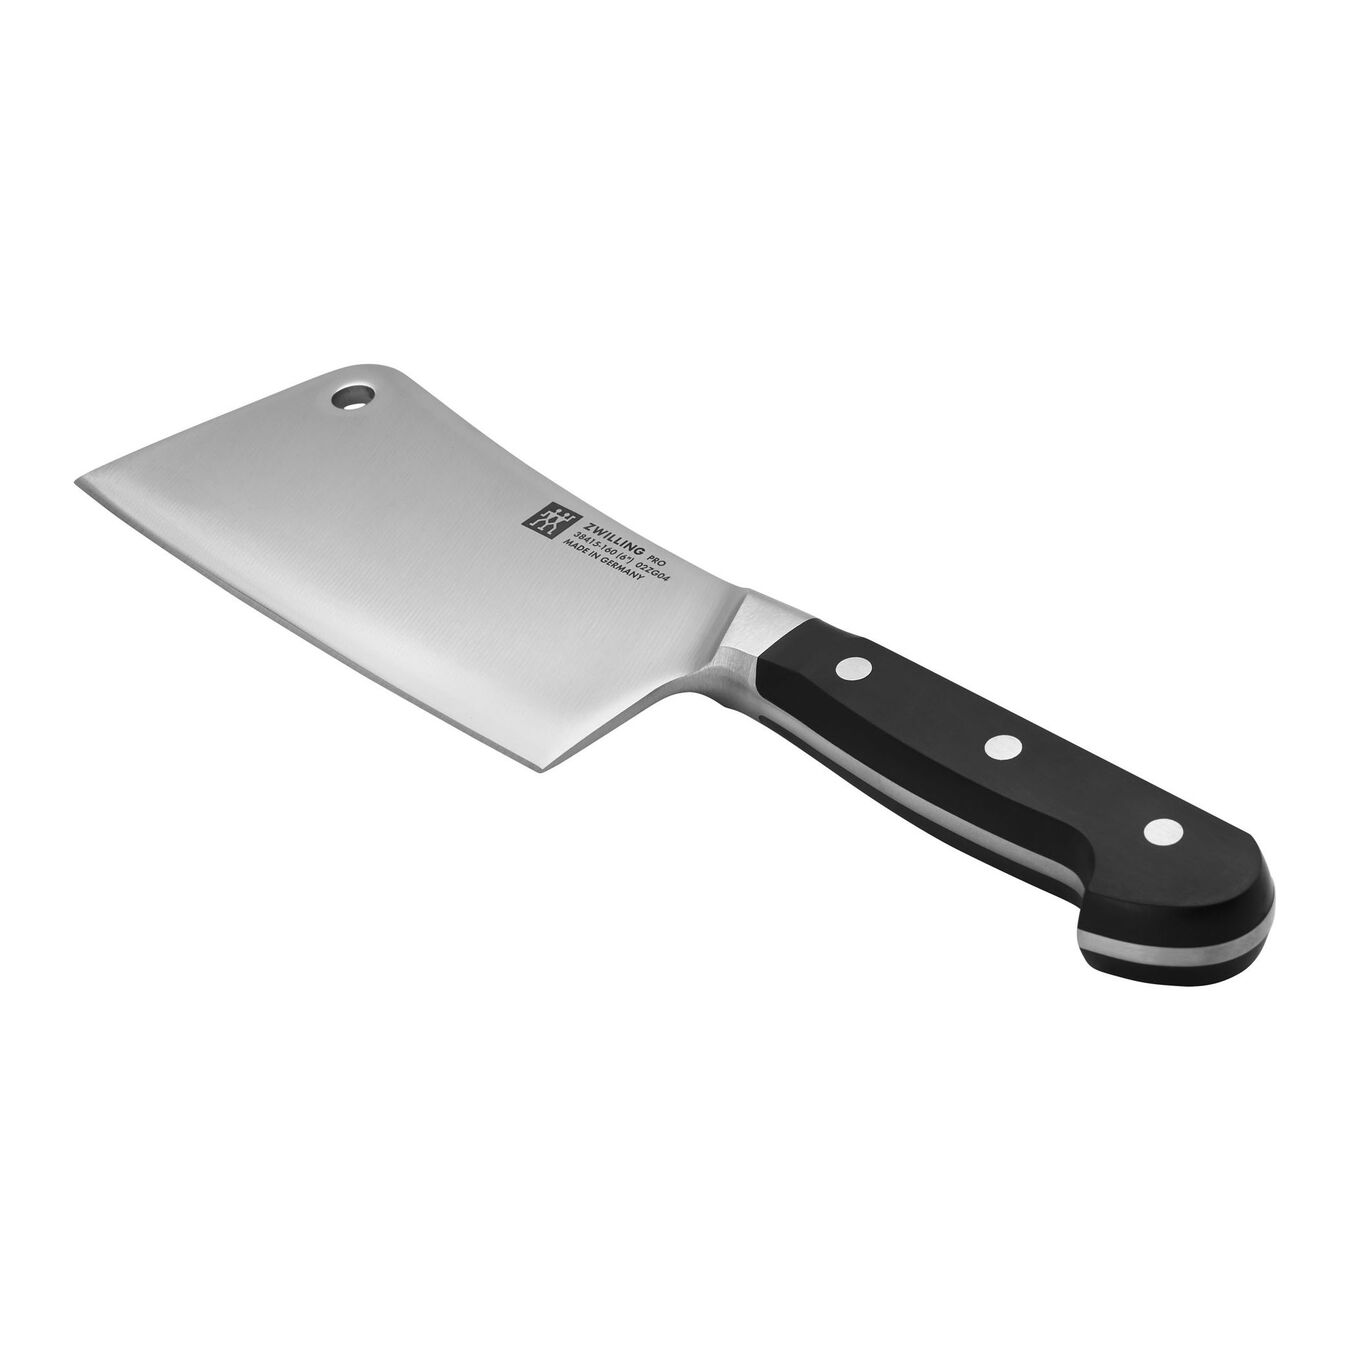 6.5 inch Cleaver - Visual Imperfections,,large 4